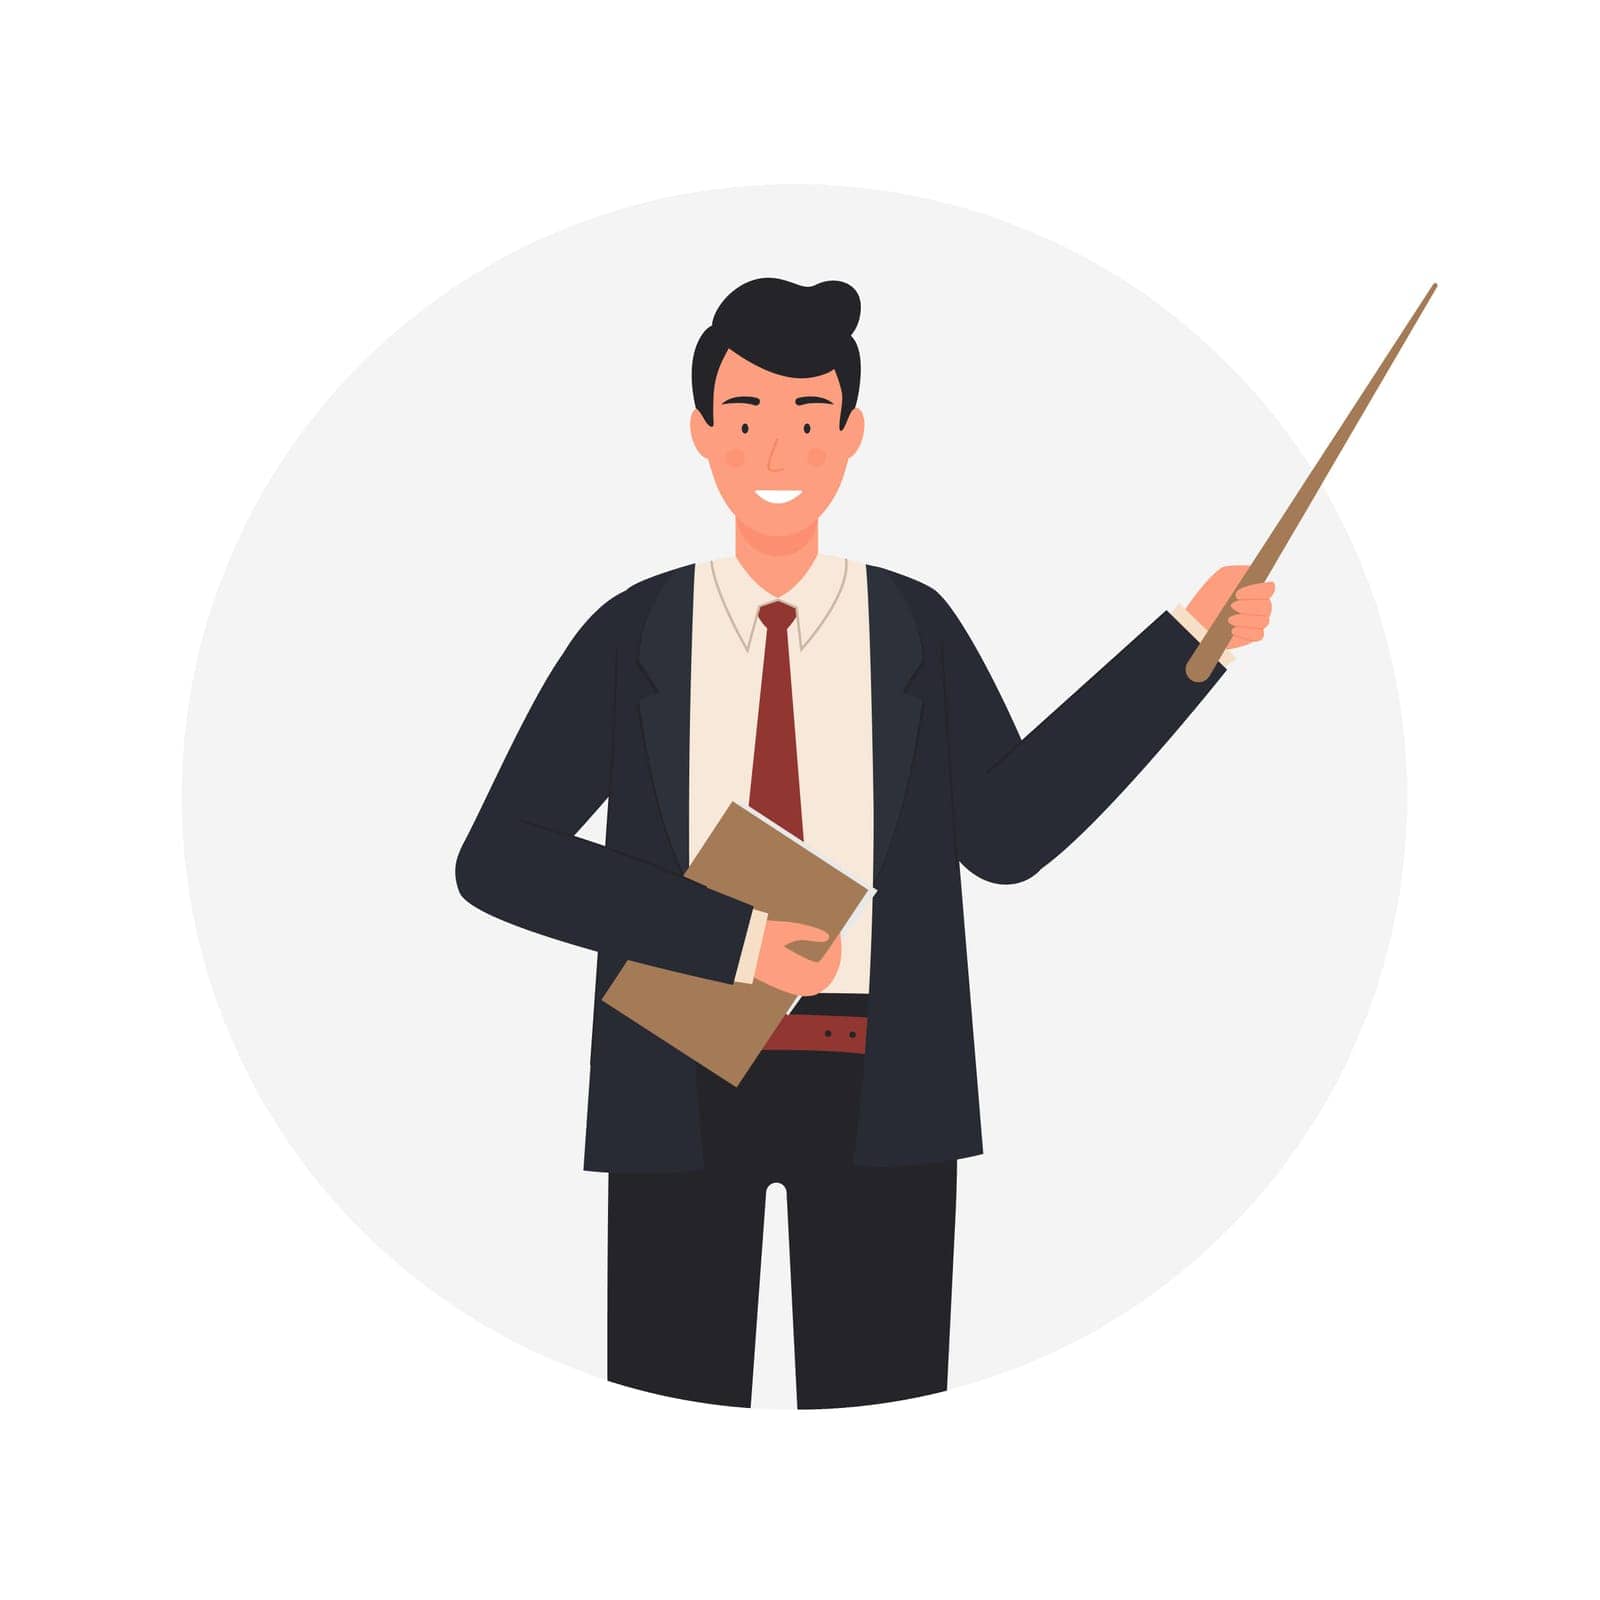 Teacher man with pointing stick. School lecturer holds book vector illustration